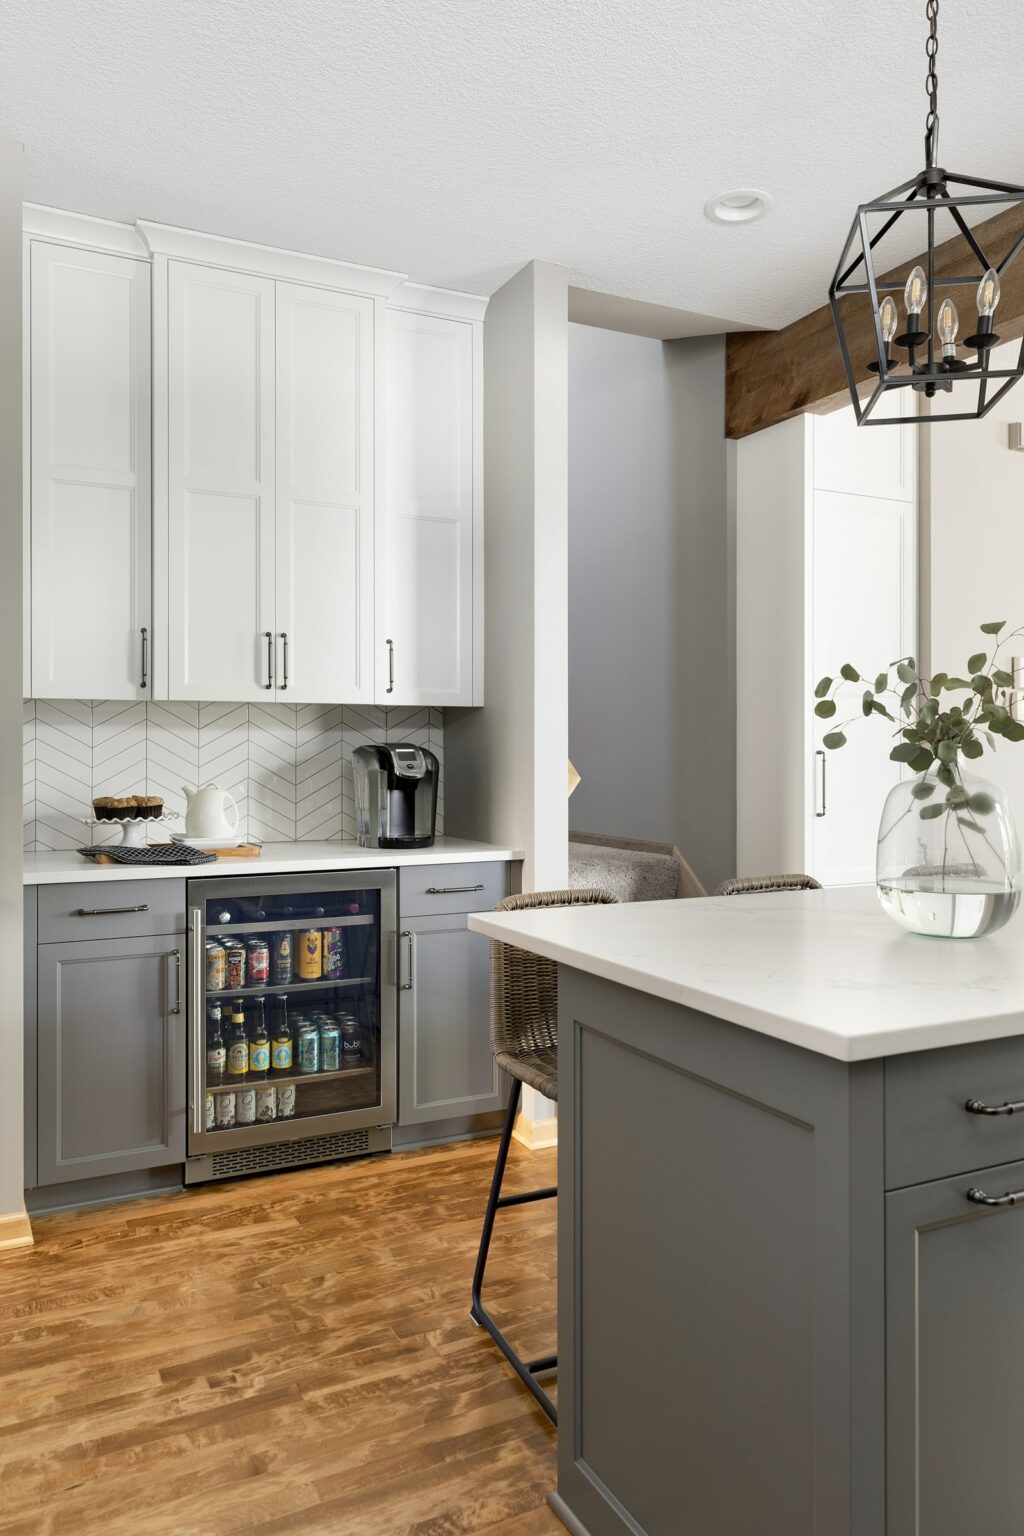 Gray and white kitchen cabinetry.